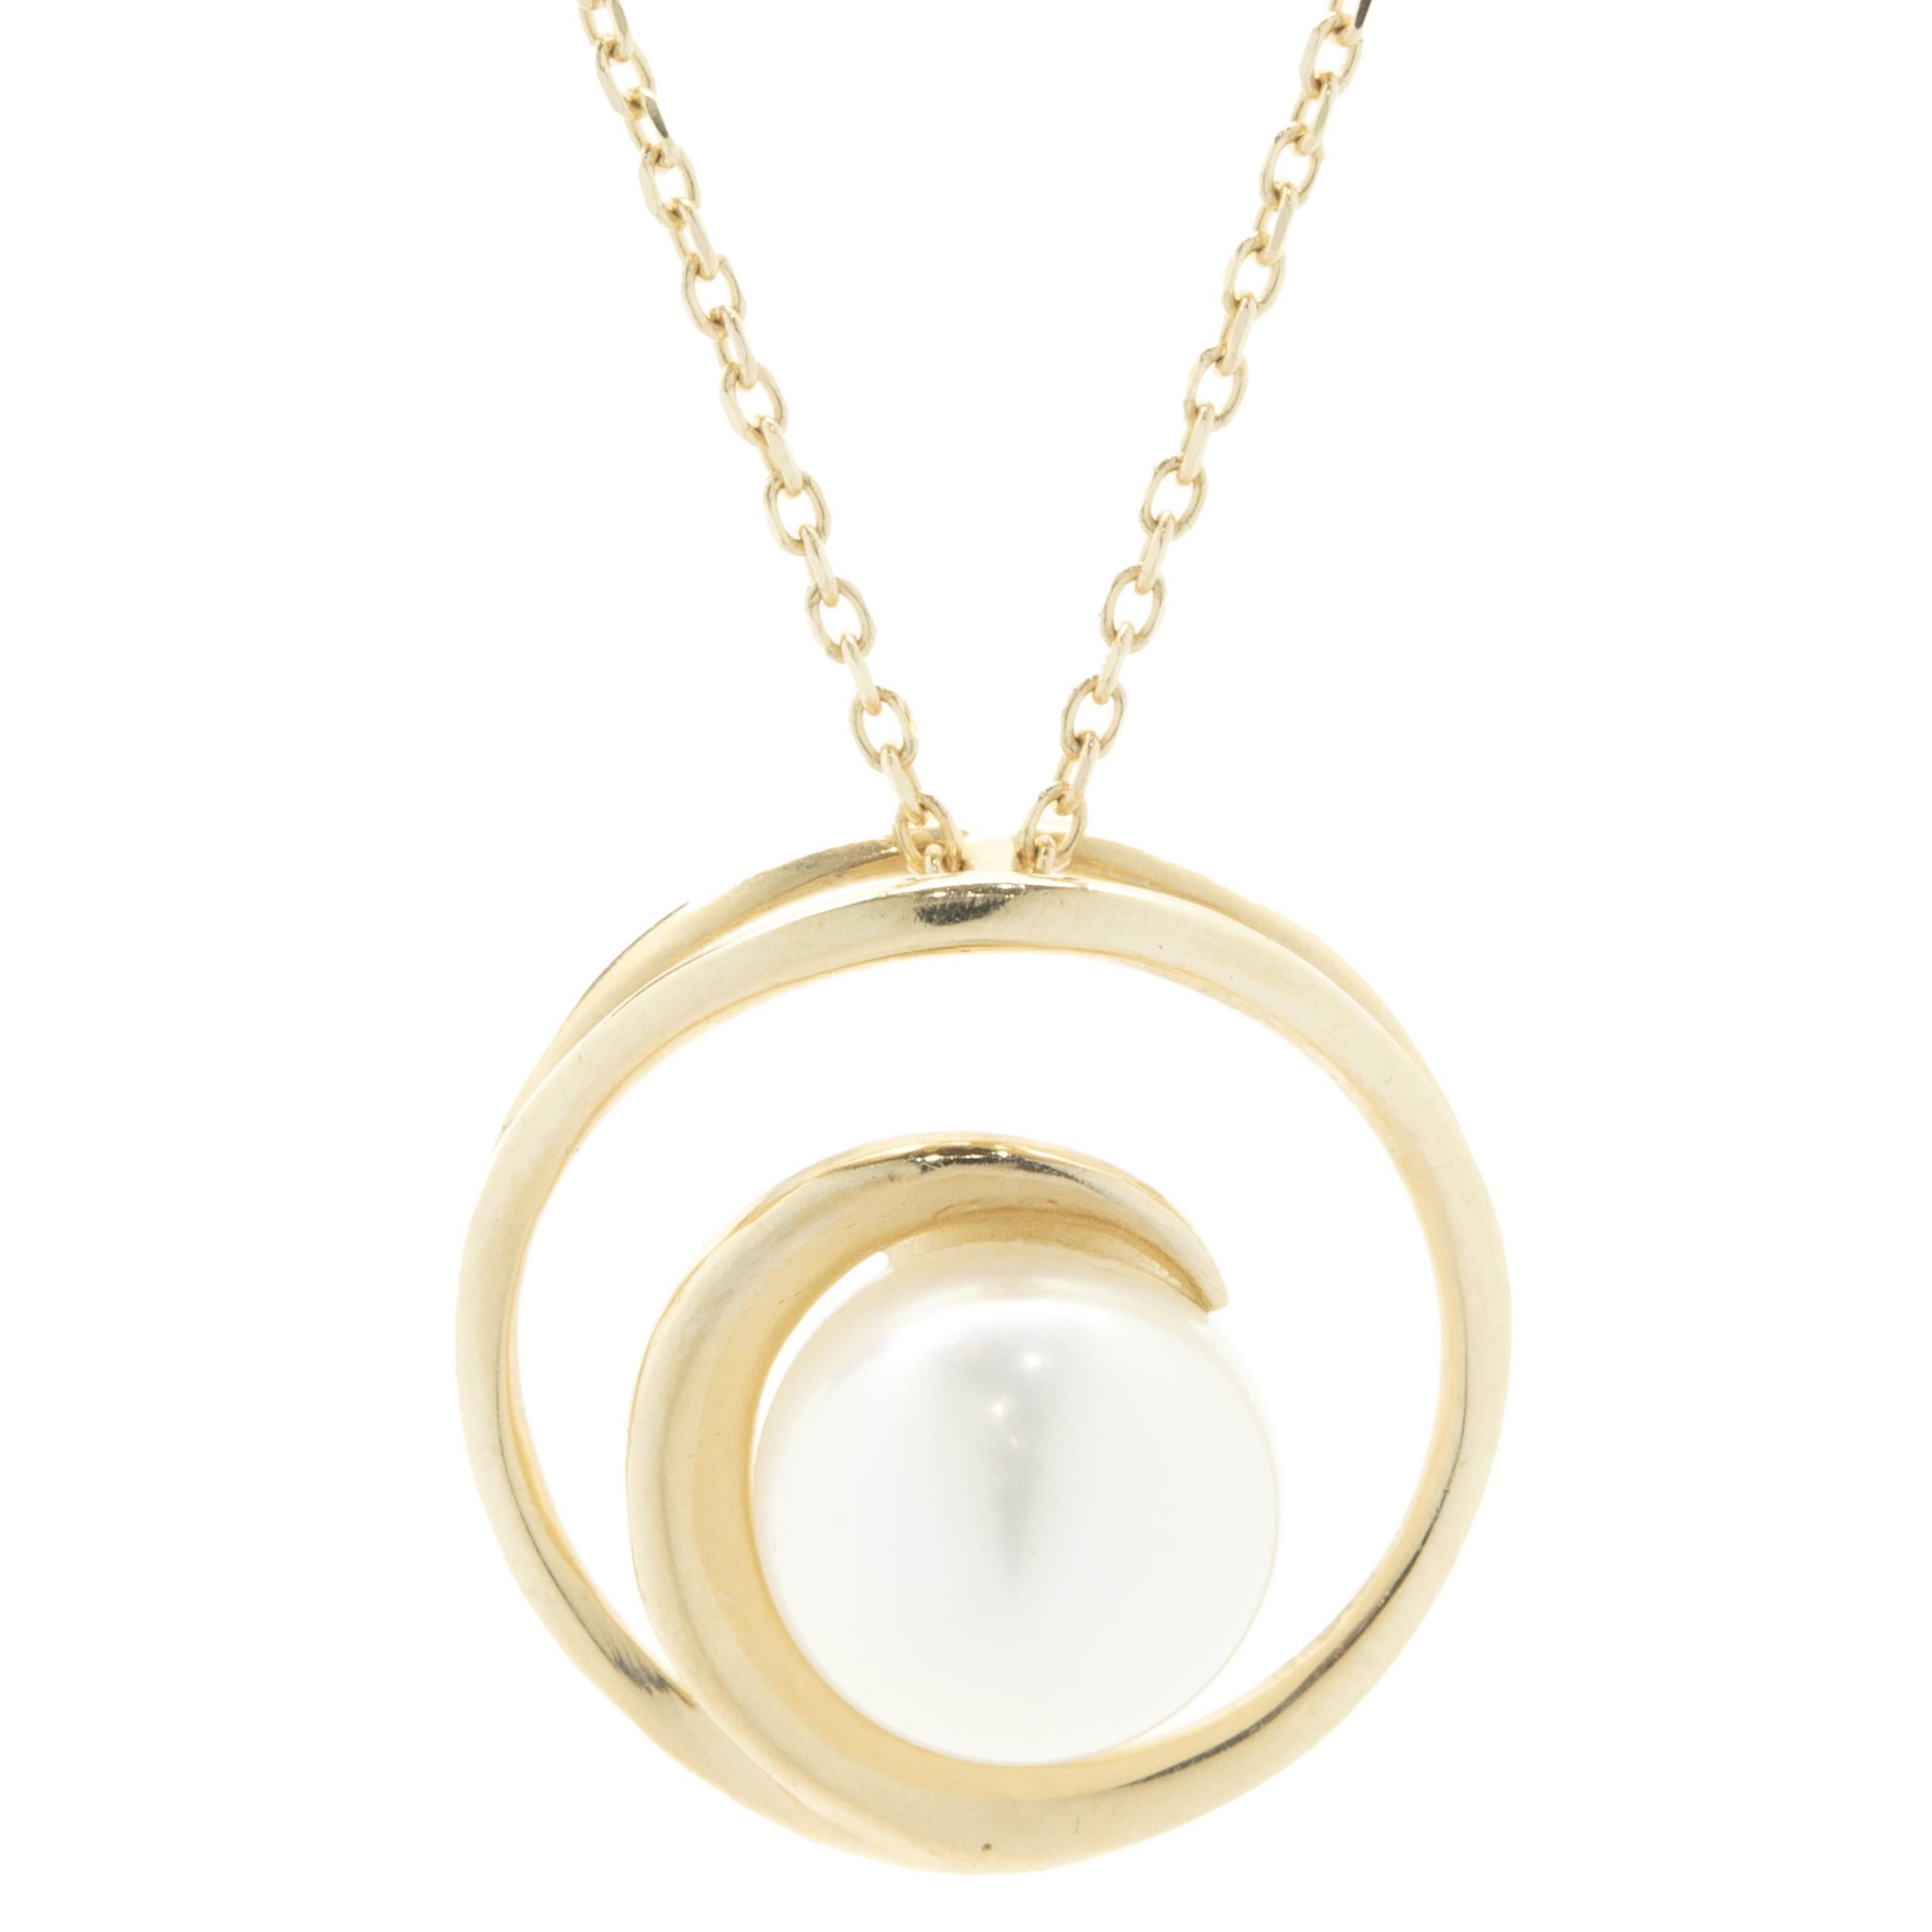 Designer: custom
Material: 14K yellow gold 
Weight: 3.43 grams
Dimensions: necklace measures 18-inches